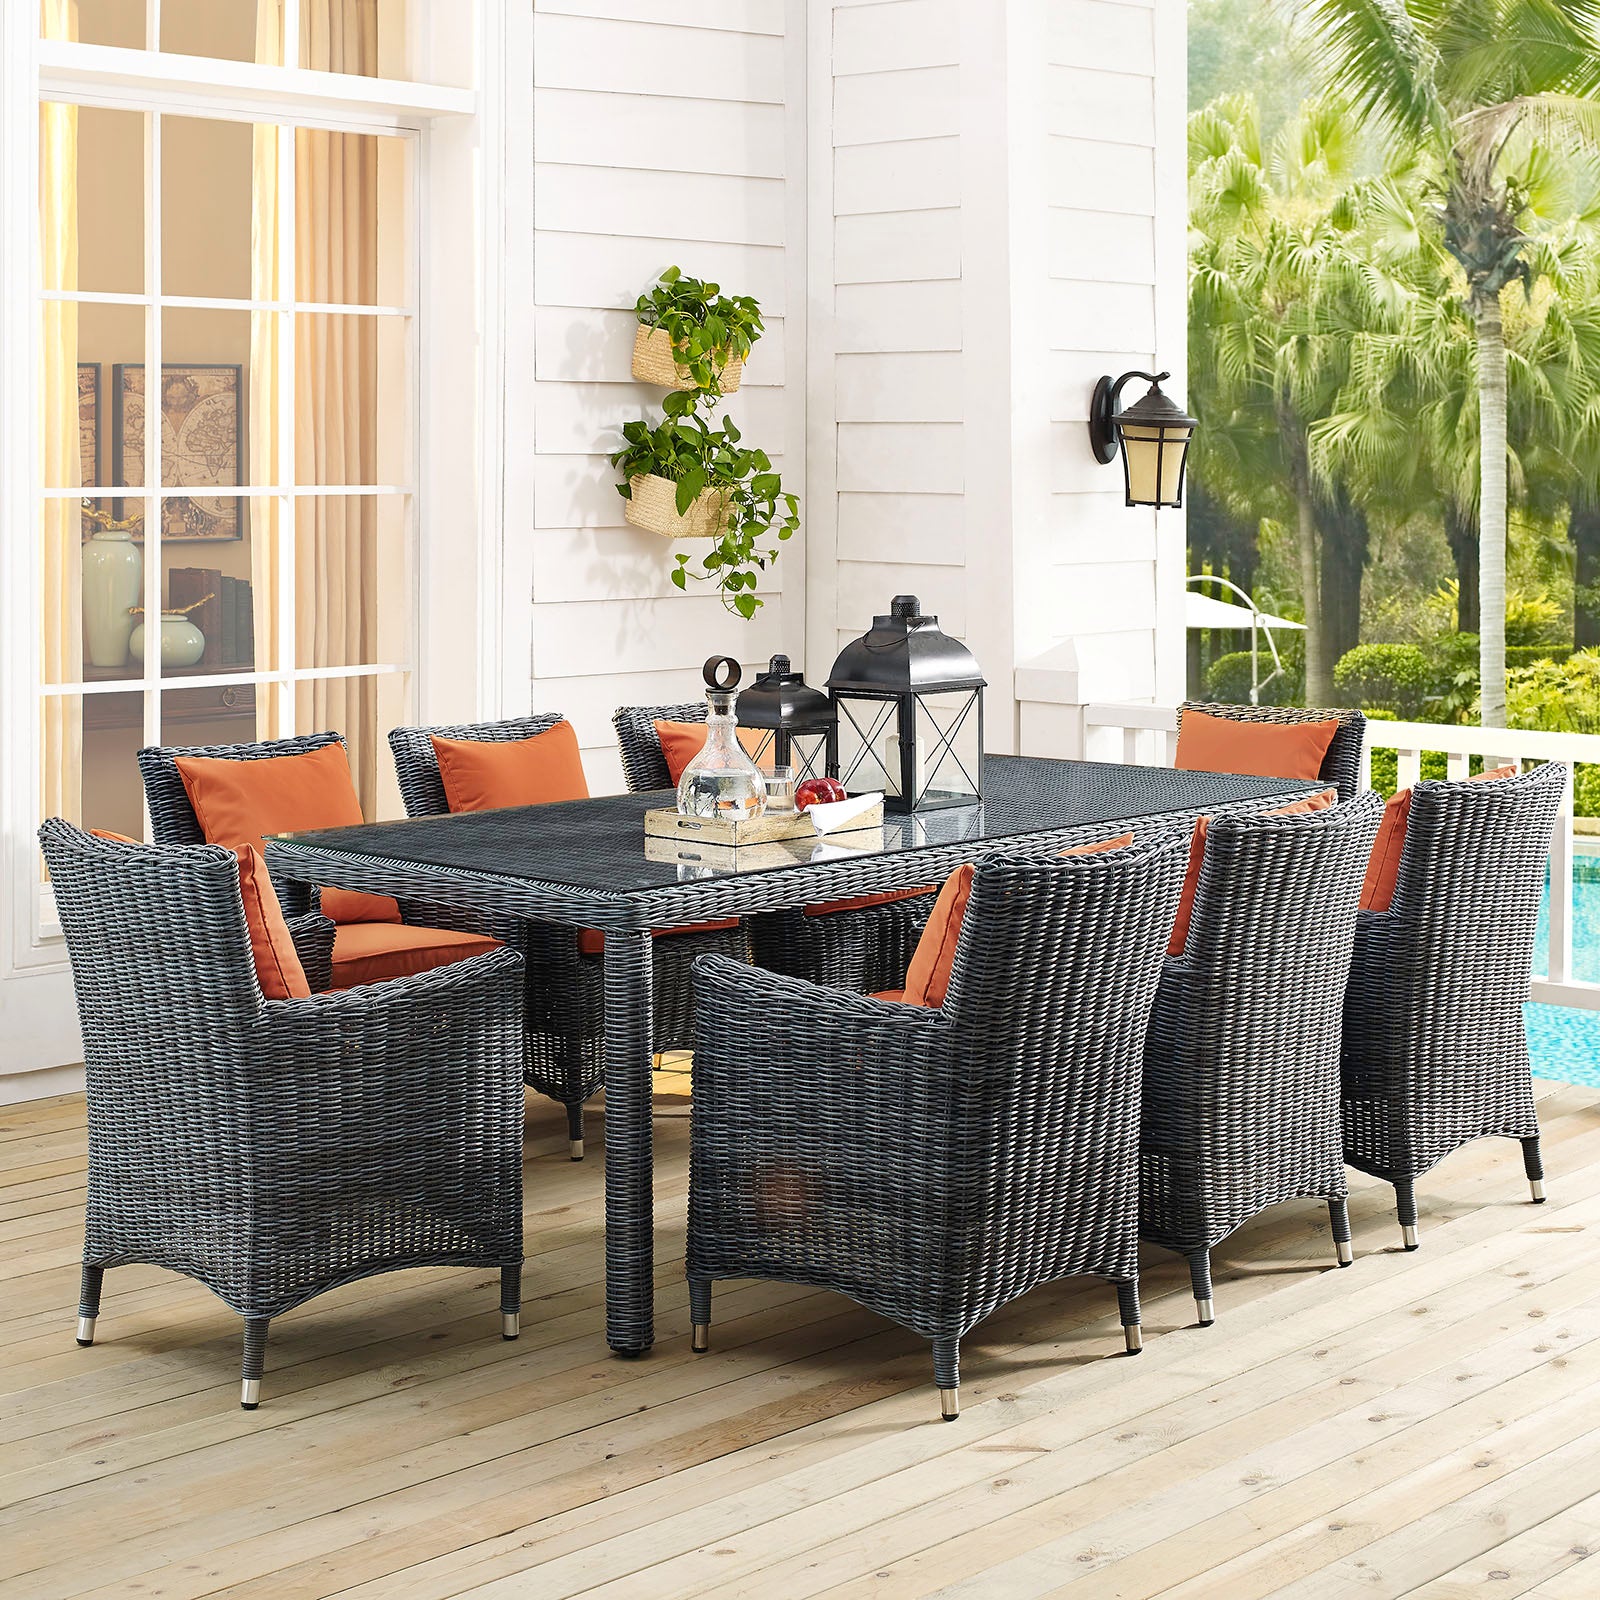 Summon 83" Outdoor Patio Dining Table - East Shore Modern Home Furnishings